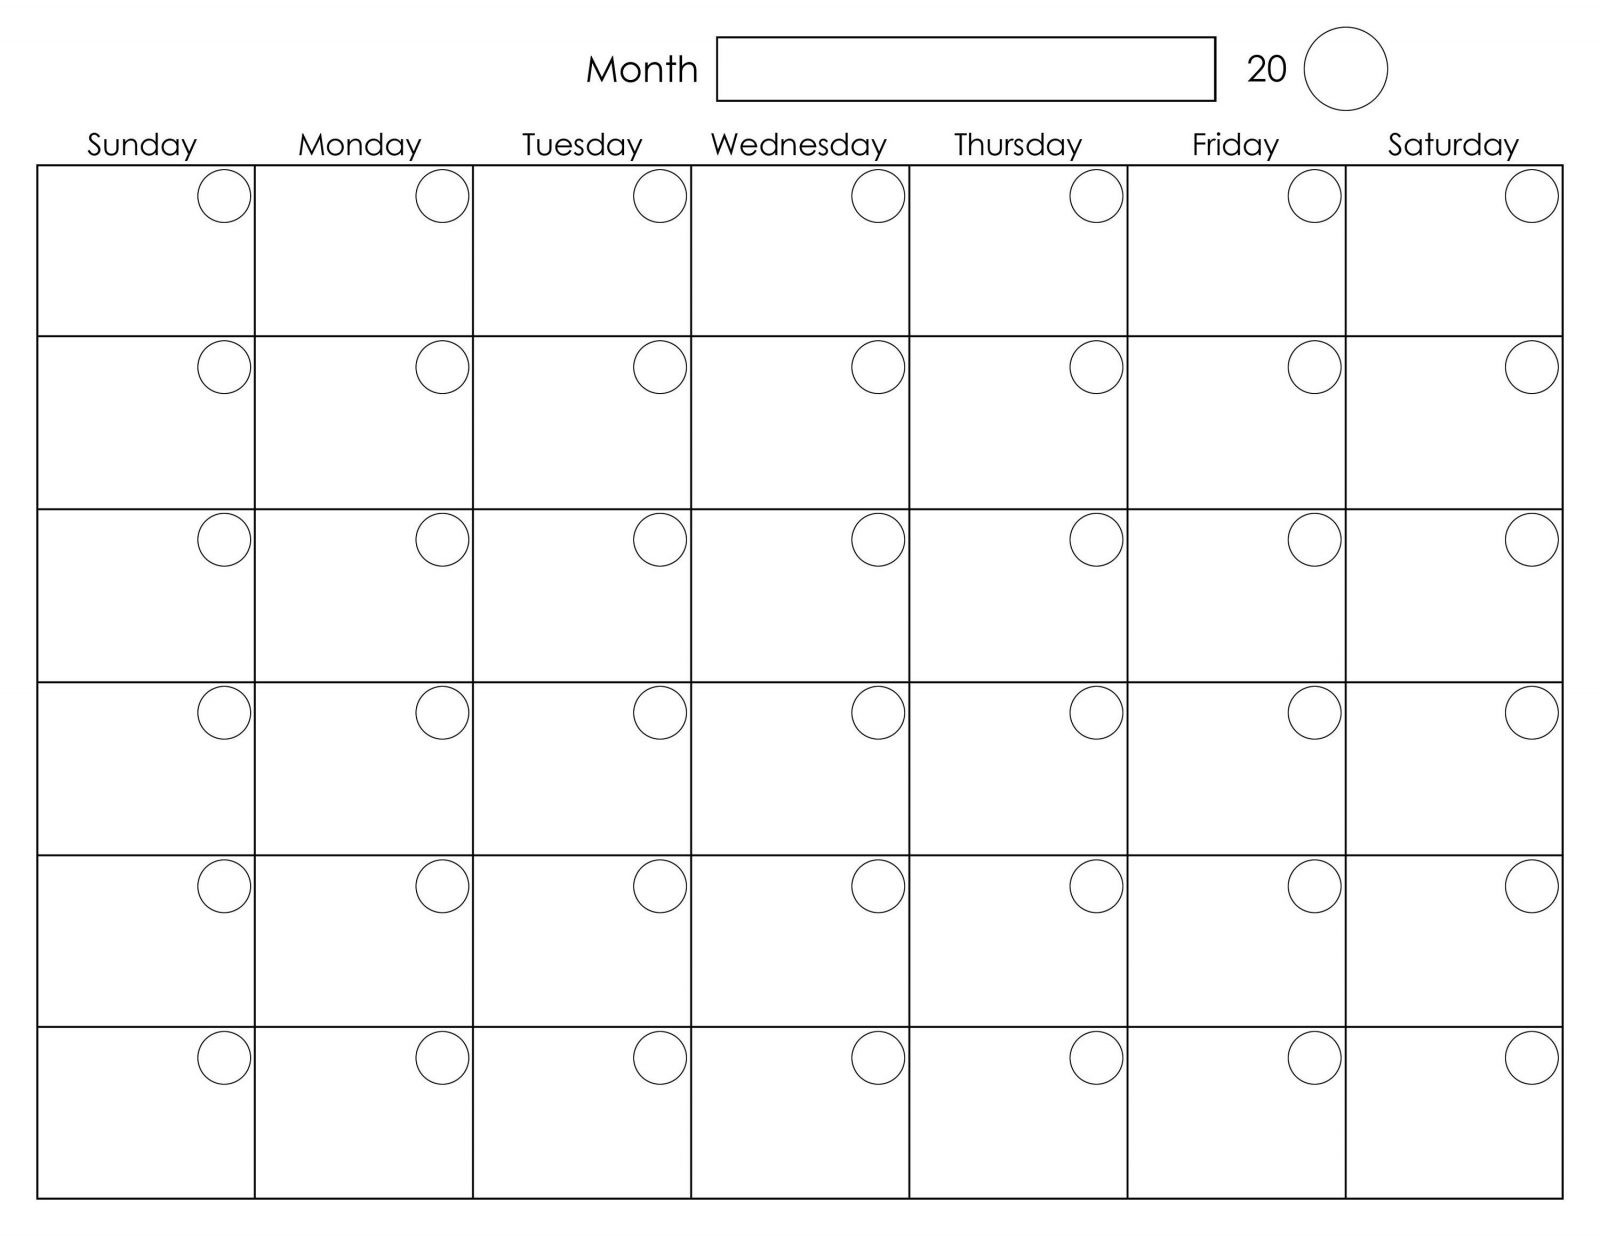 Free Blank Printable Calendar 2019 With Holidays Template-Monthly Monday To Friday Calendar